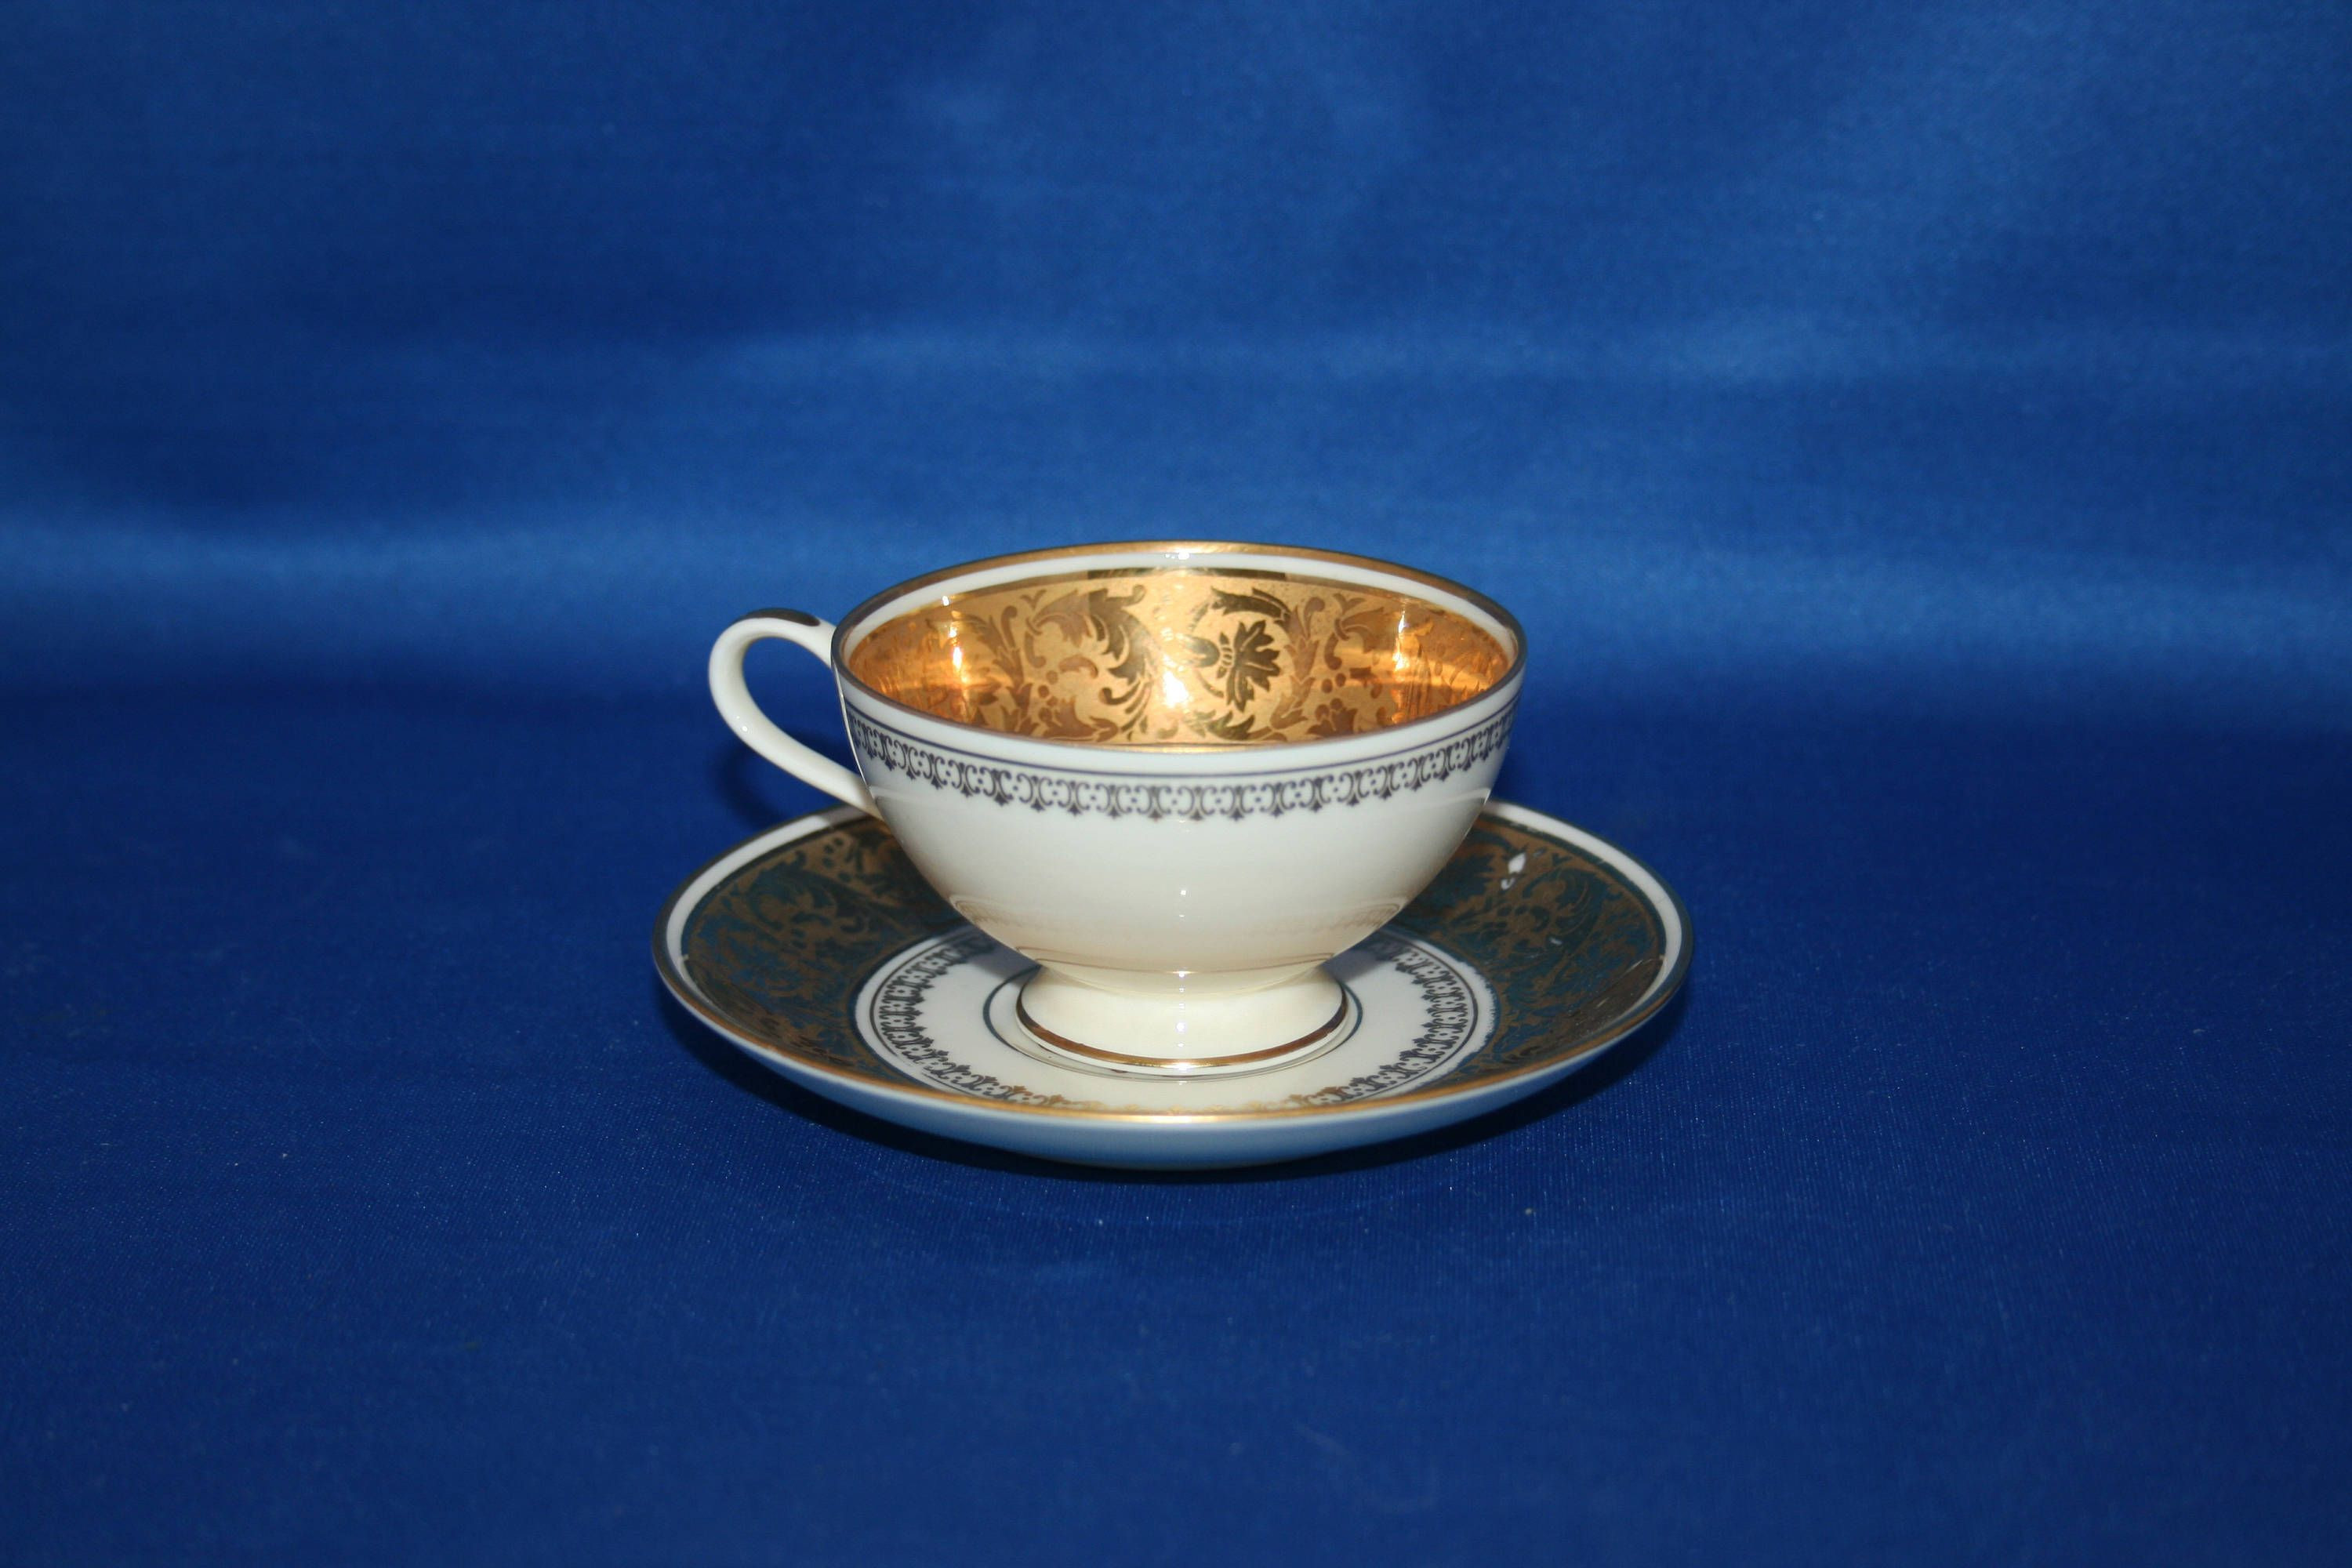 15 attractive Rosenthal Crystal Vase Germany 2024 free download rosenthal crystal vase germany of vintage gold thomas rosenthal germany small golden china tea cup within vintage gold thomas rosenthal germany small golden china tea cup saucer demitasse se